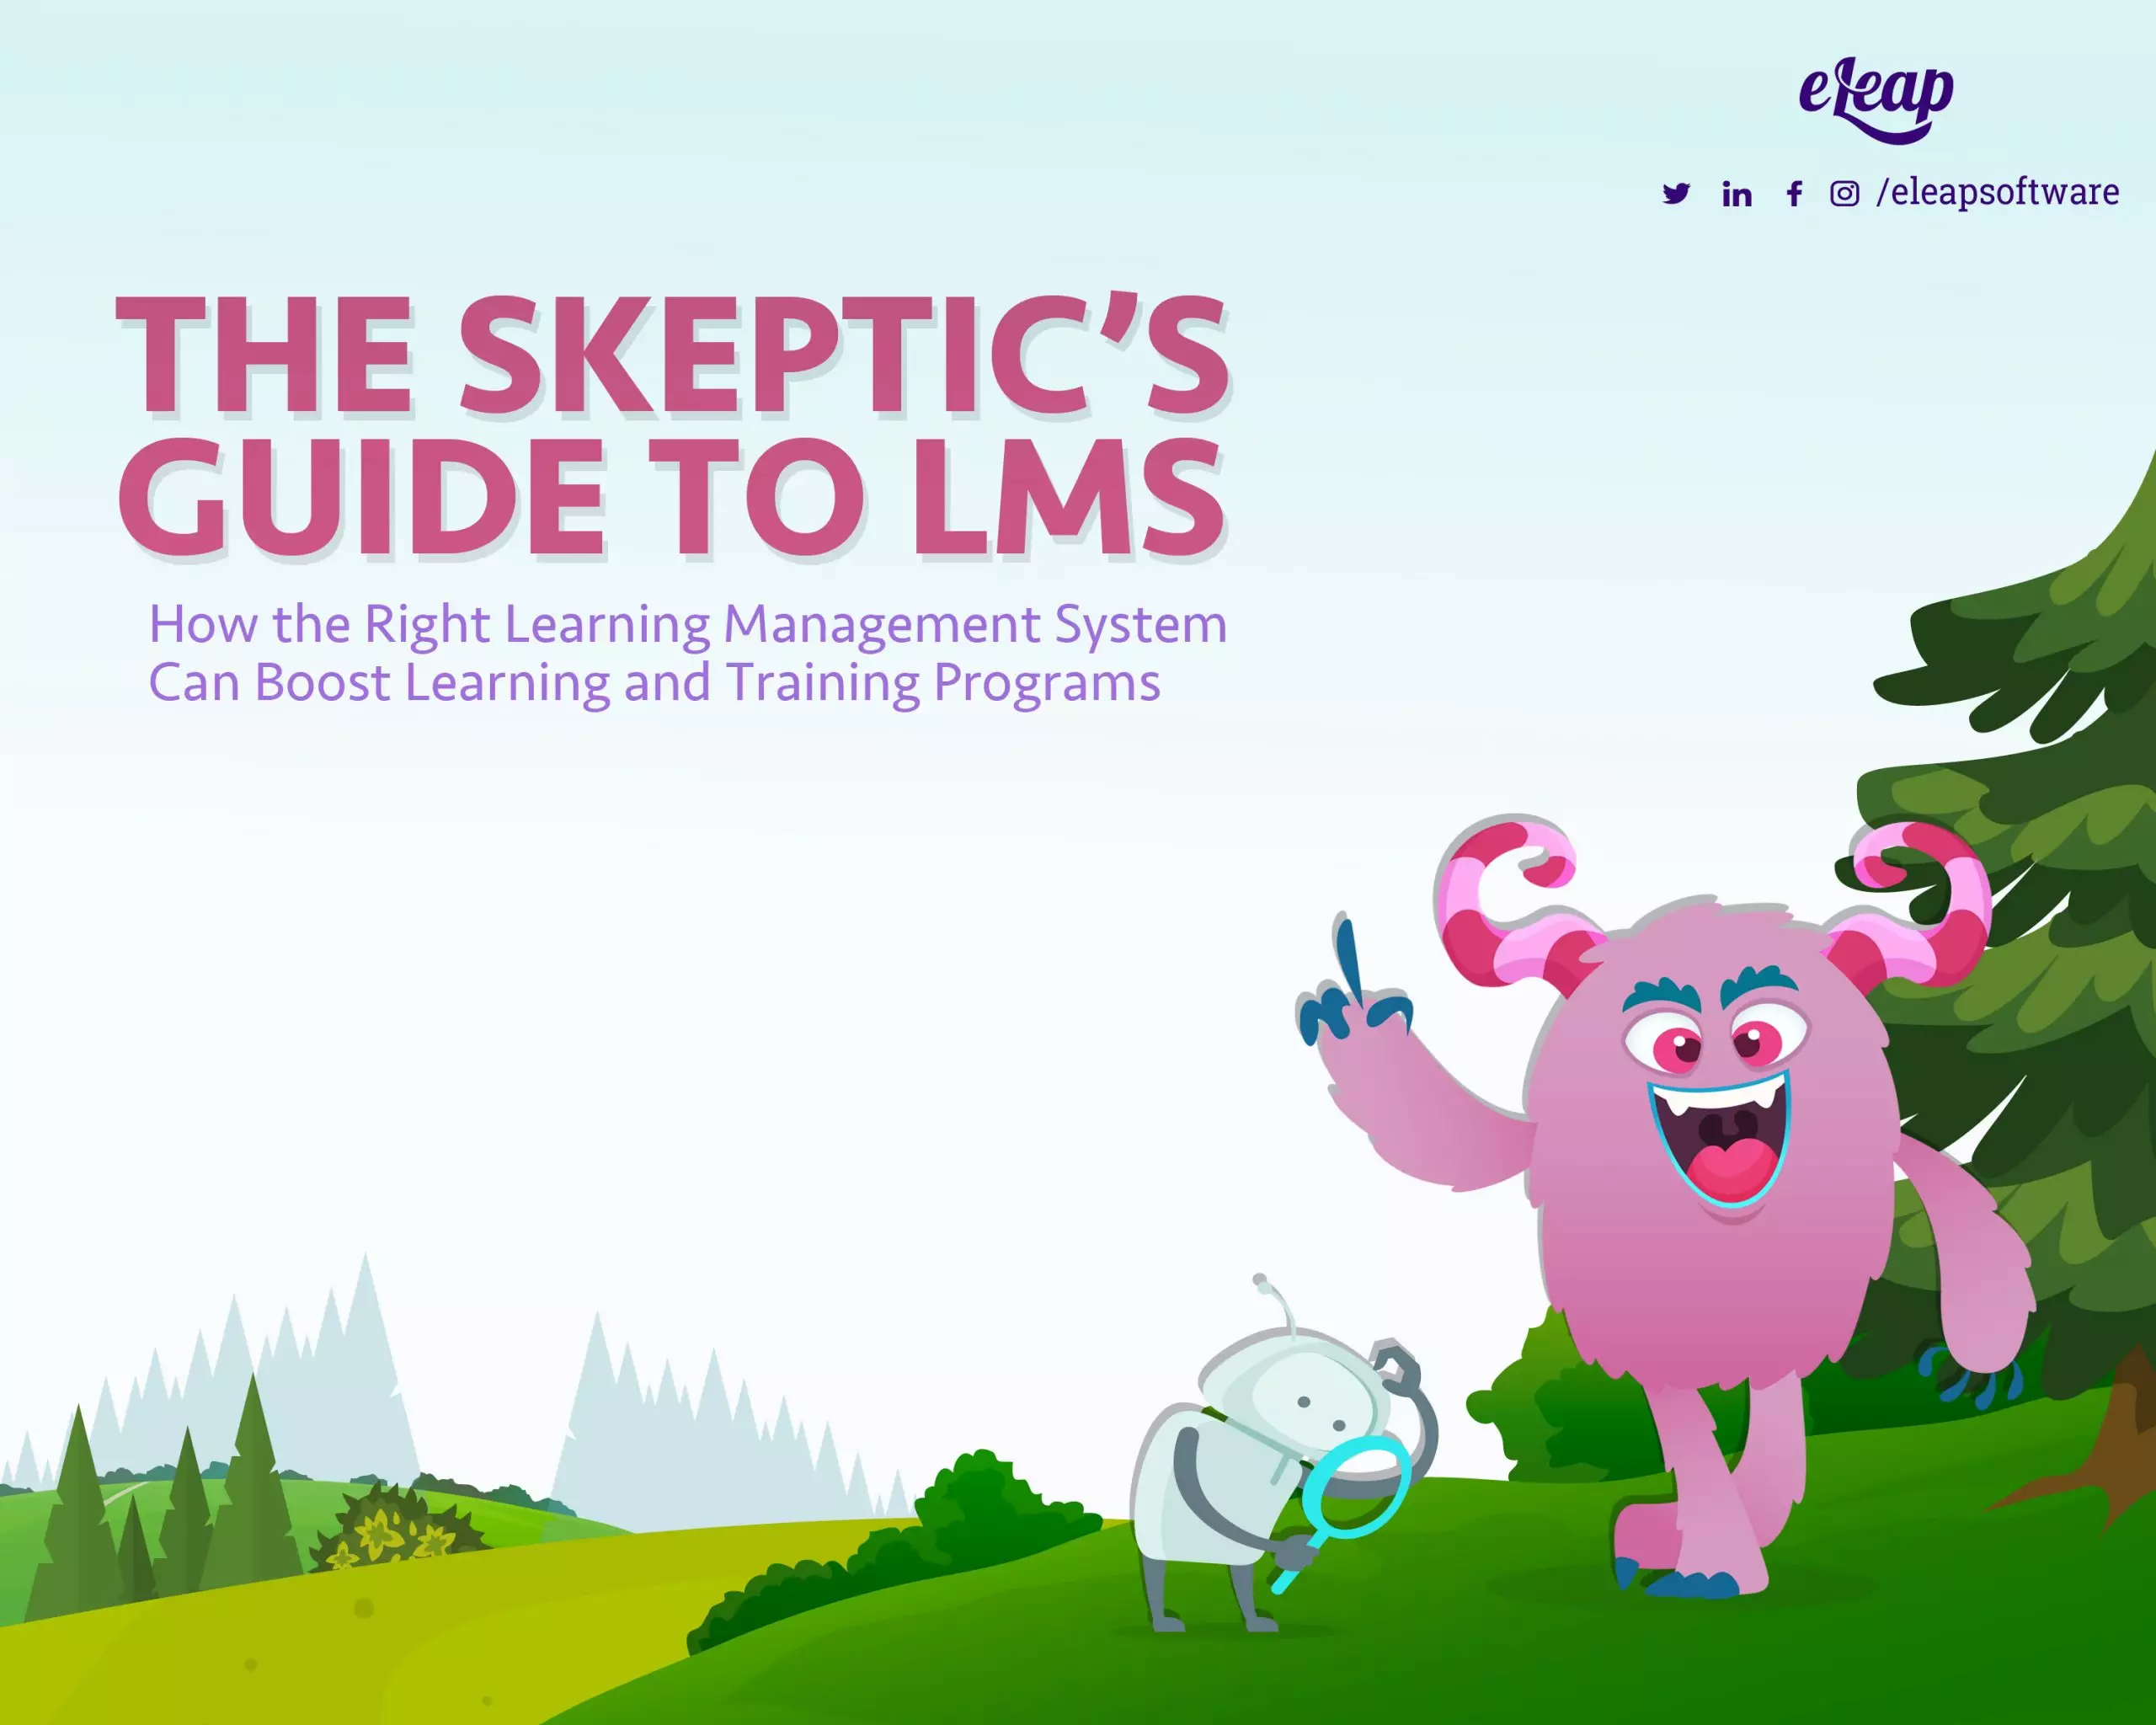 Are you an LMS skeptic?